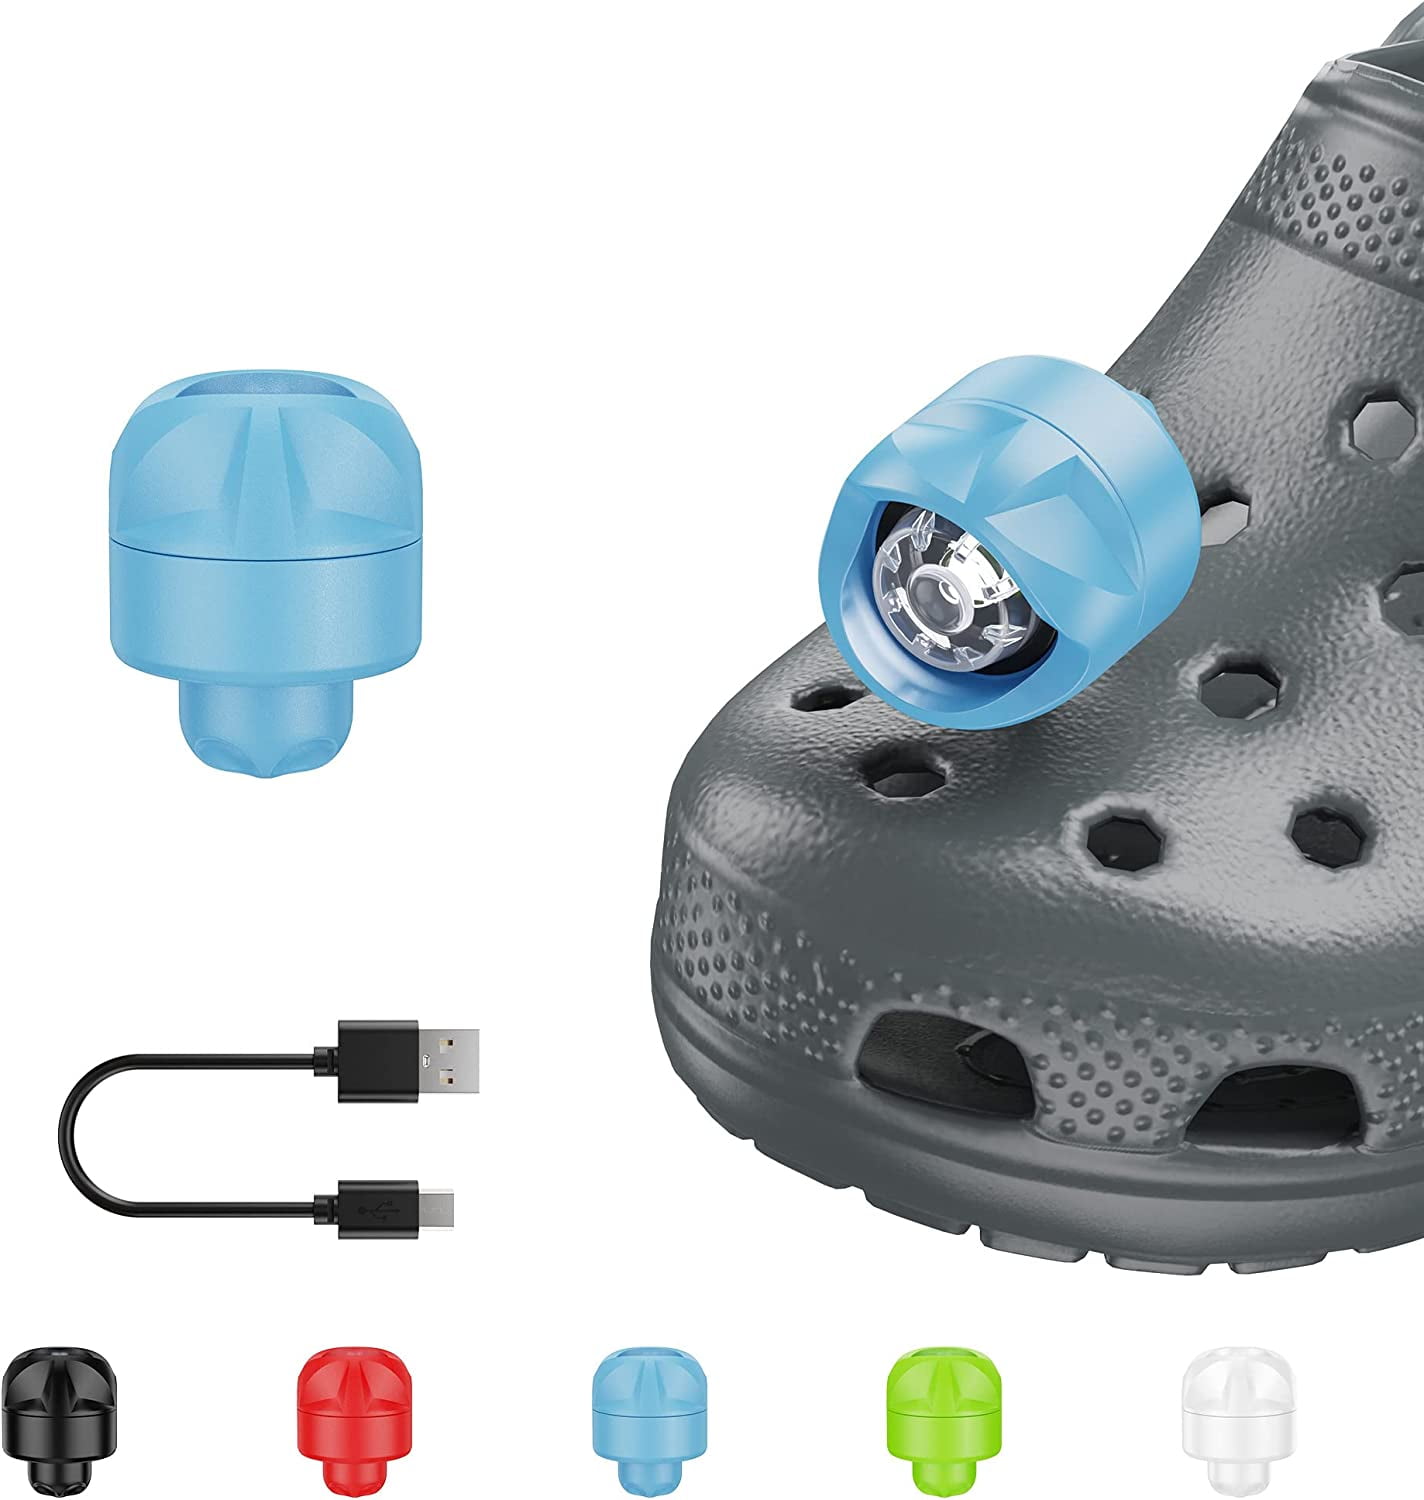 Patiofeel Rechargeable Headlights for Crocs 2pcs, ABS Clip on Clog ...